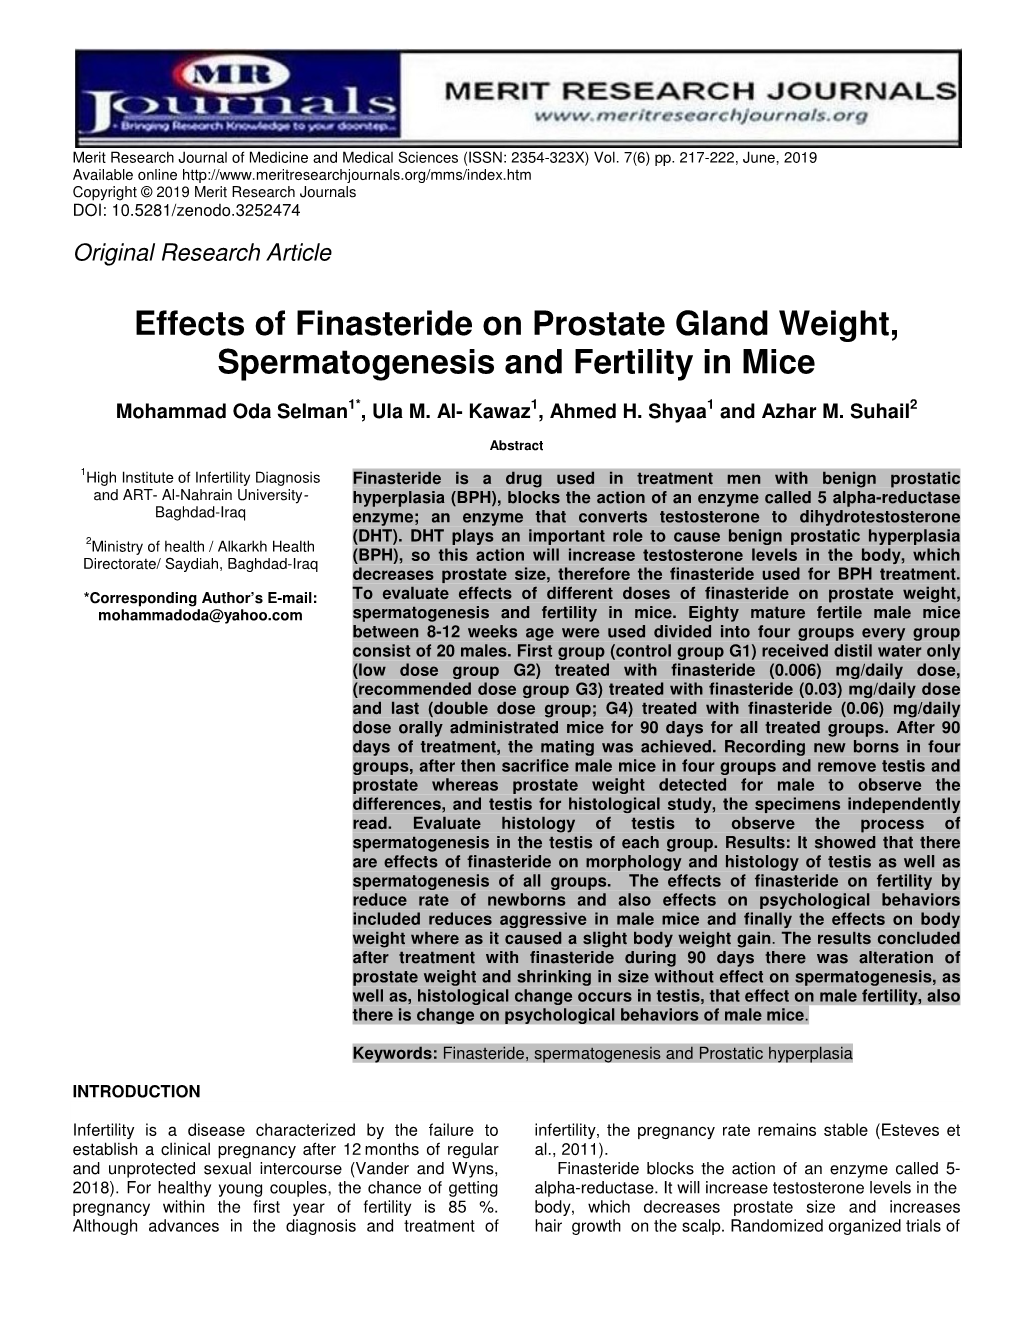 Effects of Finasteride on Prostate Gland Weight, Spermatogenesis and Fertility in Mice